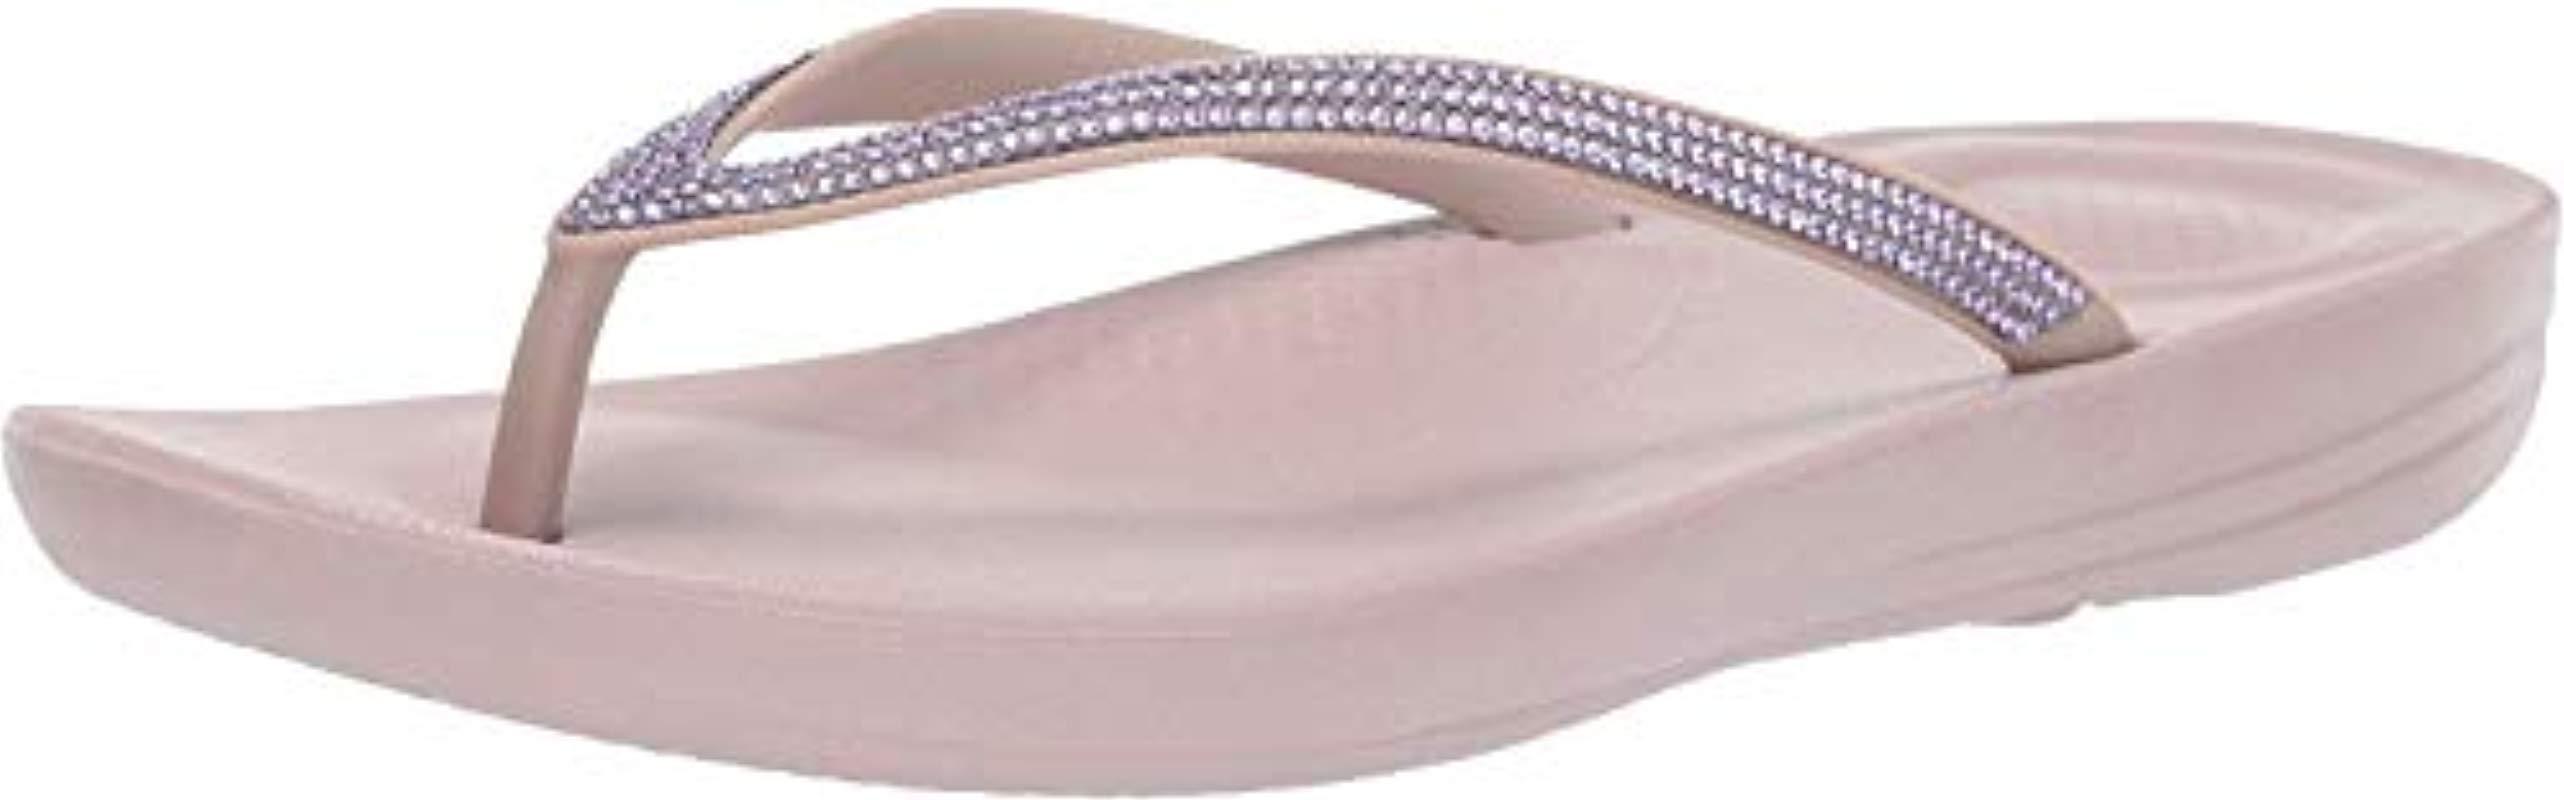 Fitflop Rubber Iqushion Sparkle Flip Flops in Mink (Pink) - Lyst